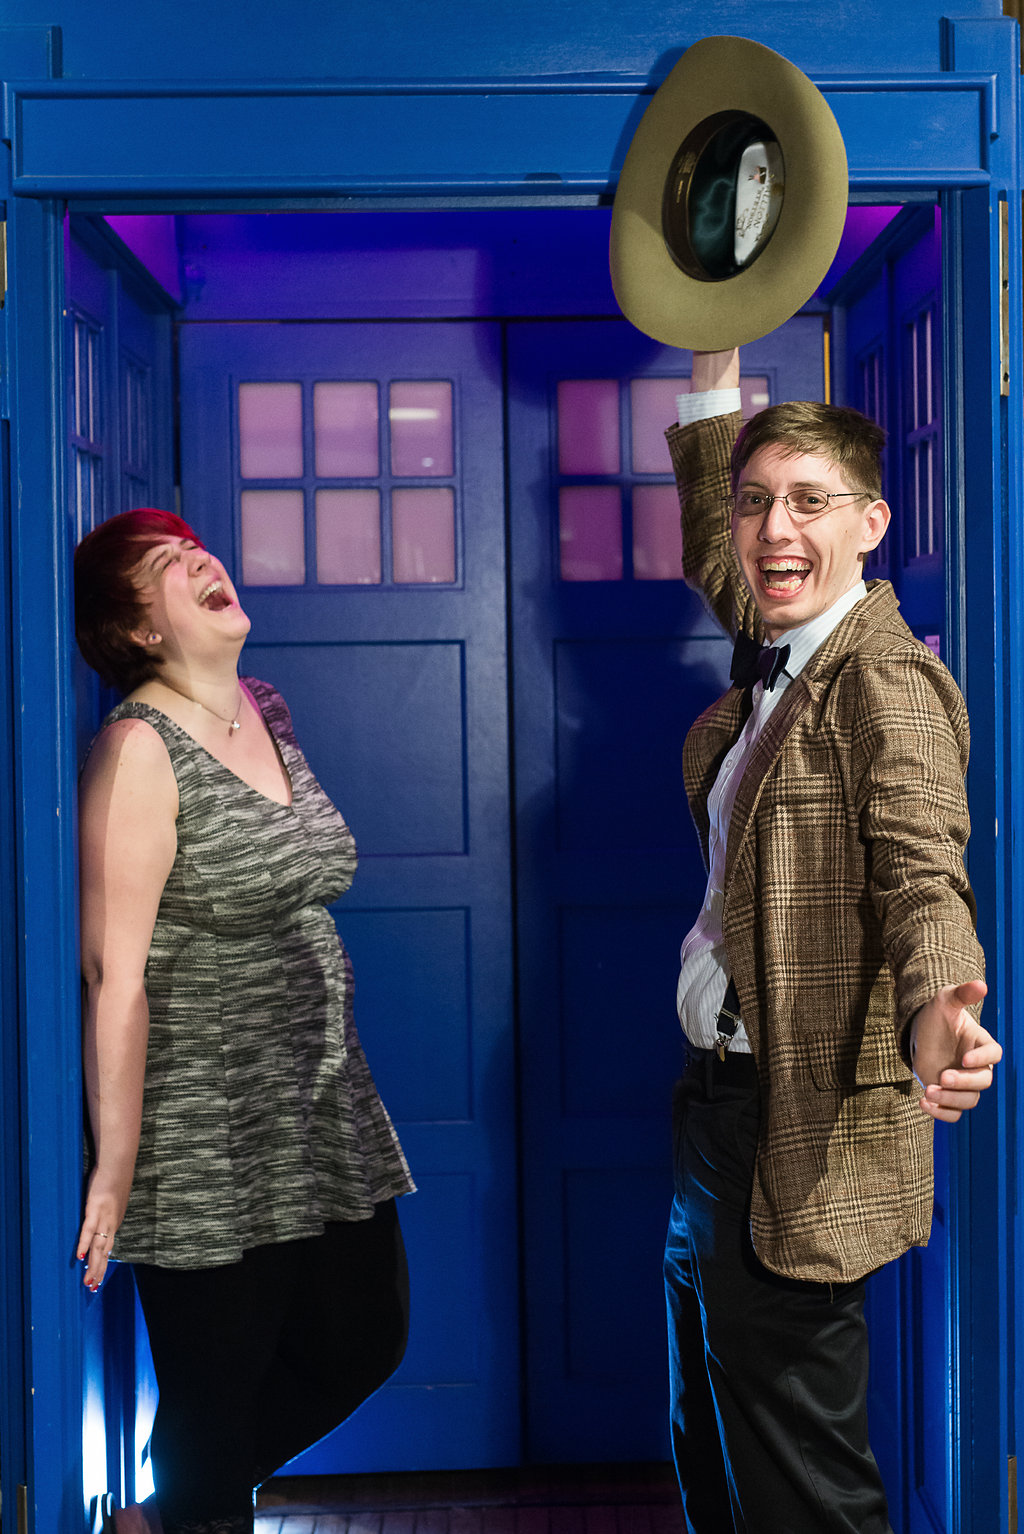 Doctor Who Themed Engagement Session